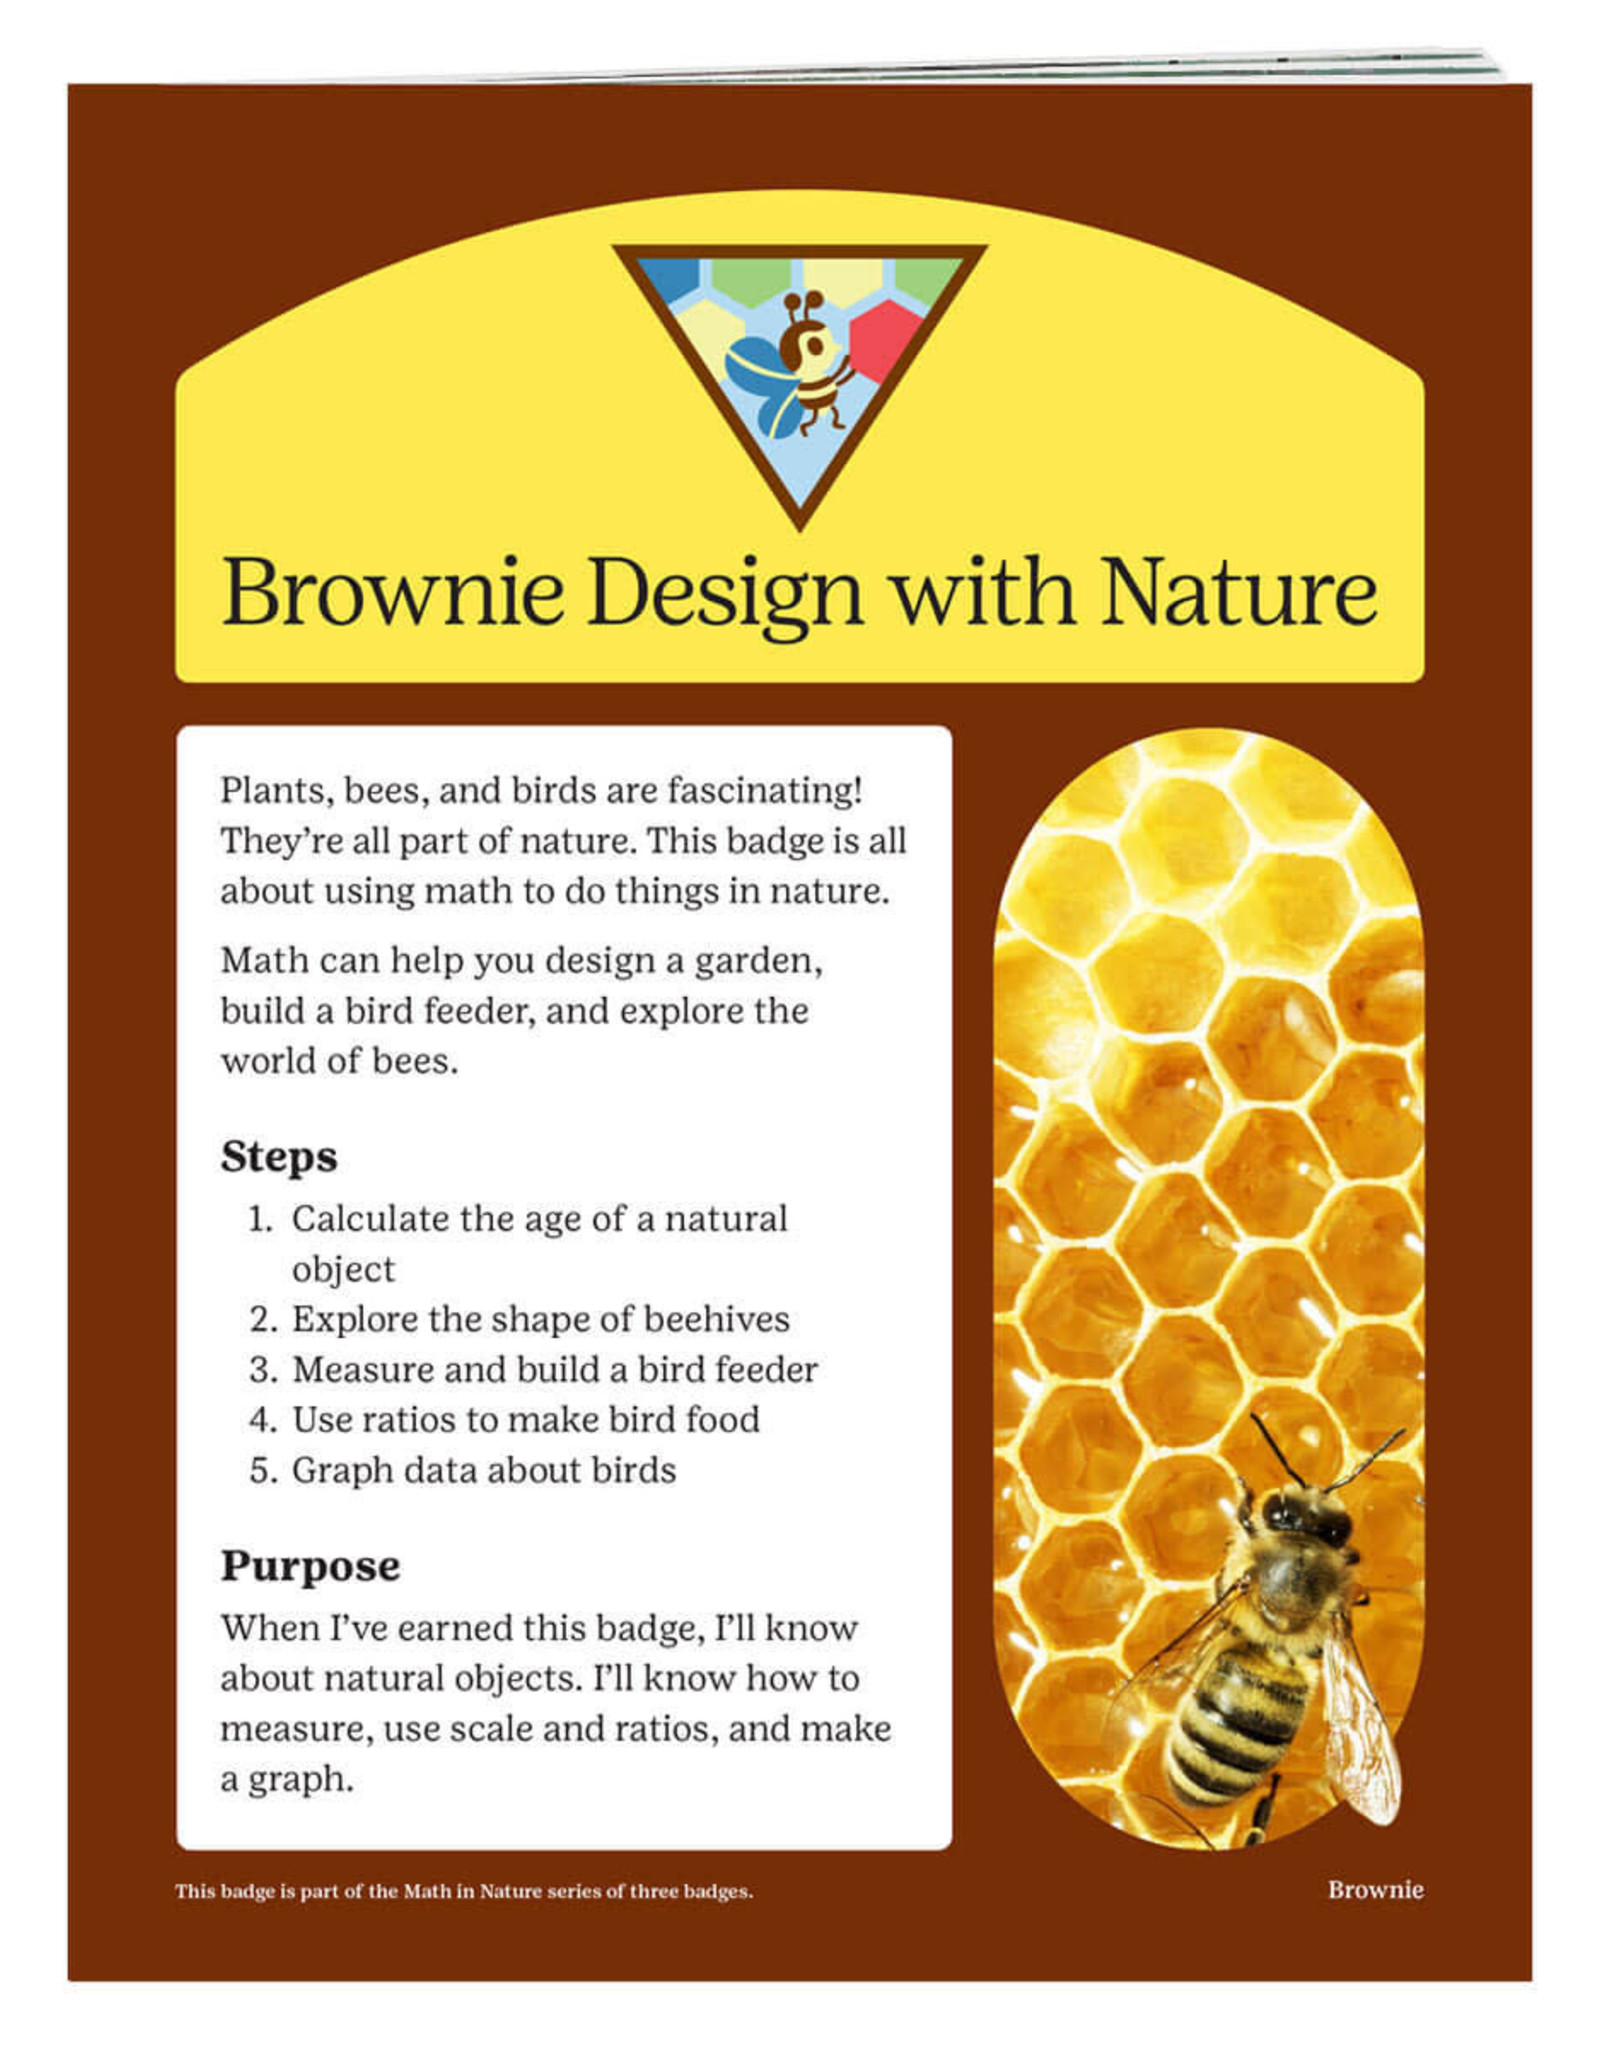 GIRL SCOUTS OF THE USA Brownie Design With Nature Requirements Pamphlet